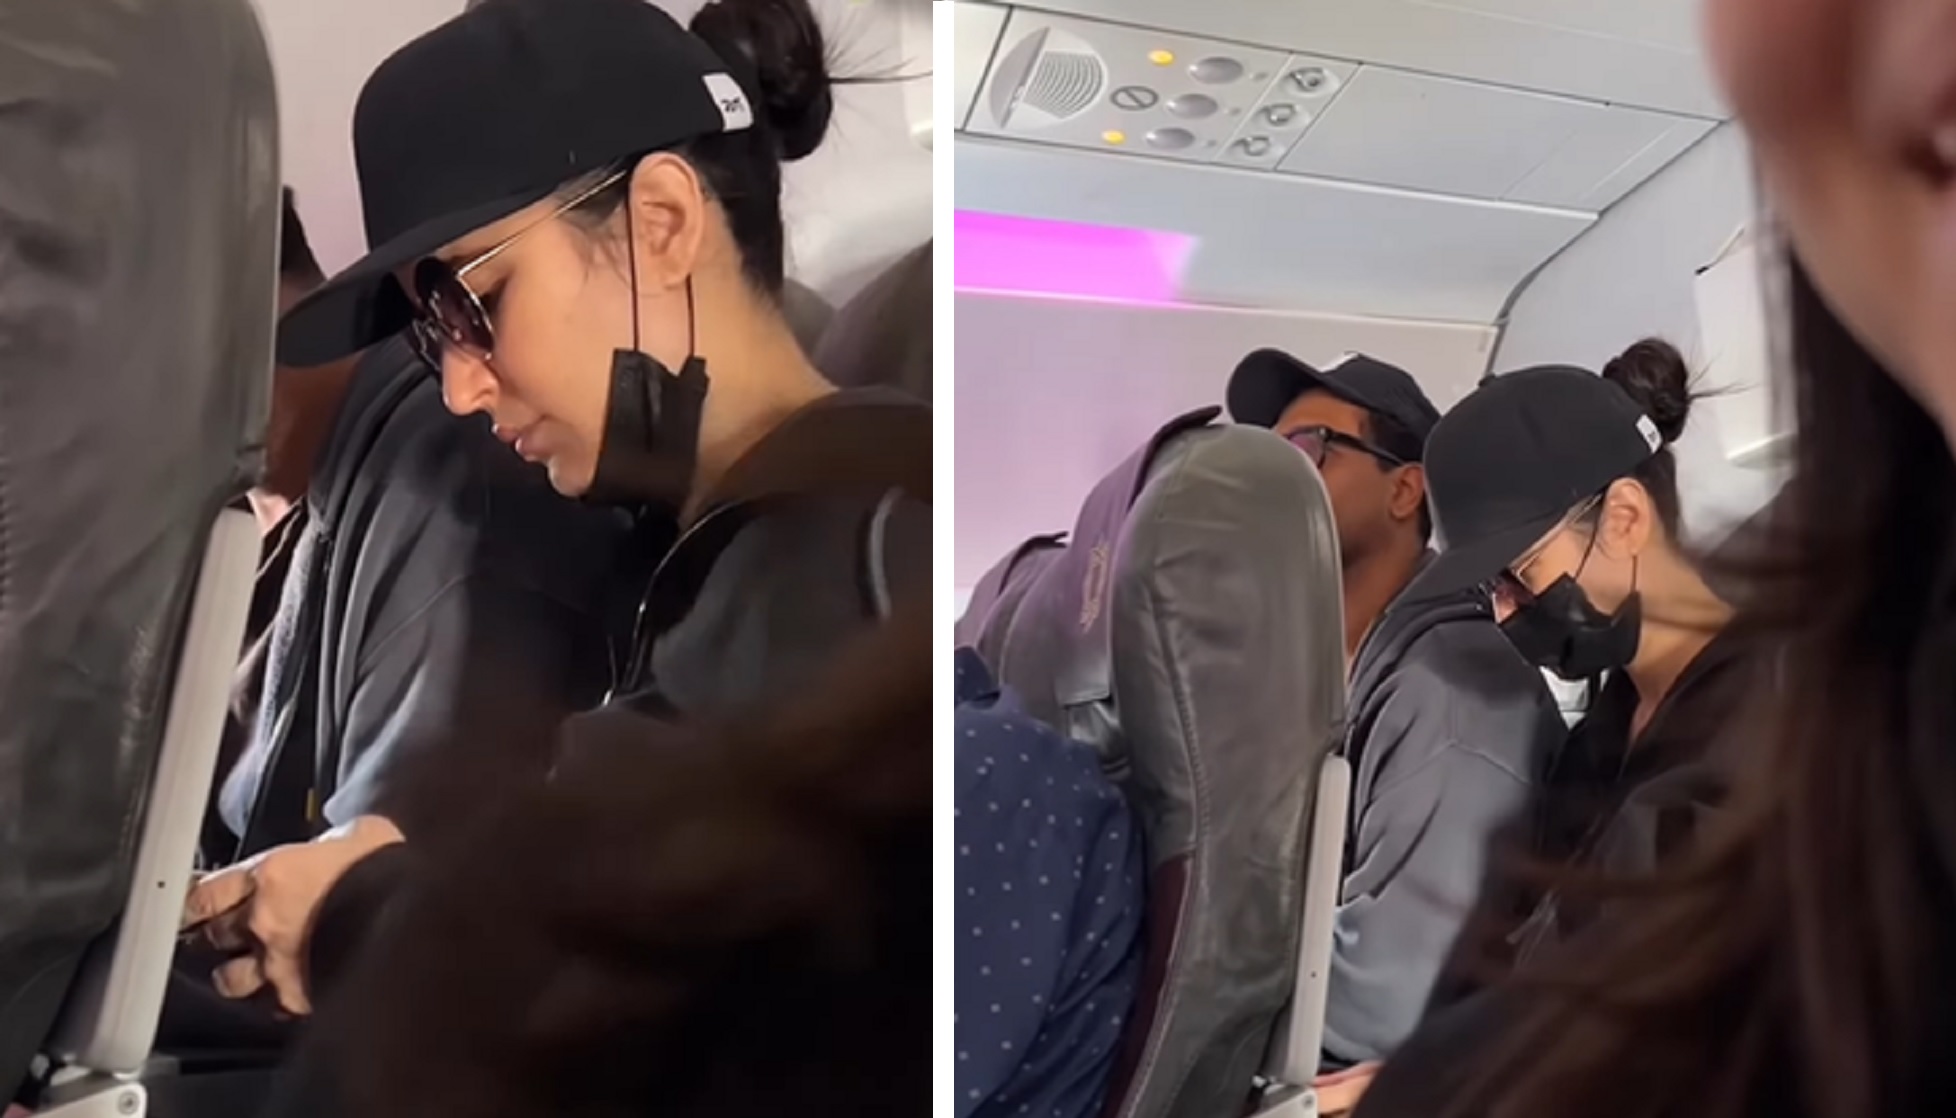 Katrina Kaif Flies On Economy Class With Vicky Kaushal, ‘Imagine being in same flight as Kat’ a fan wrote